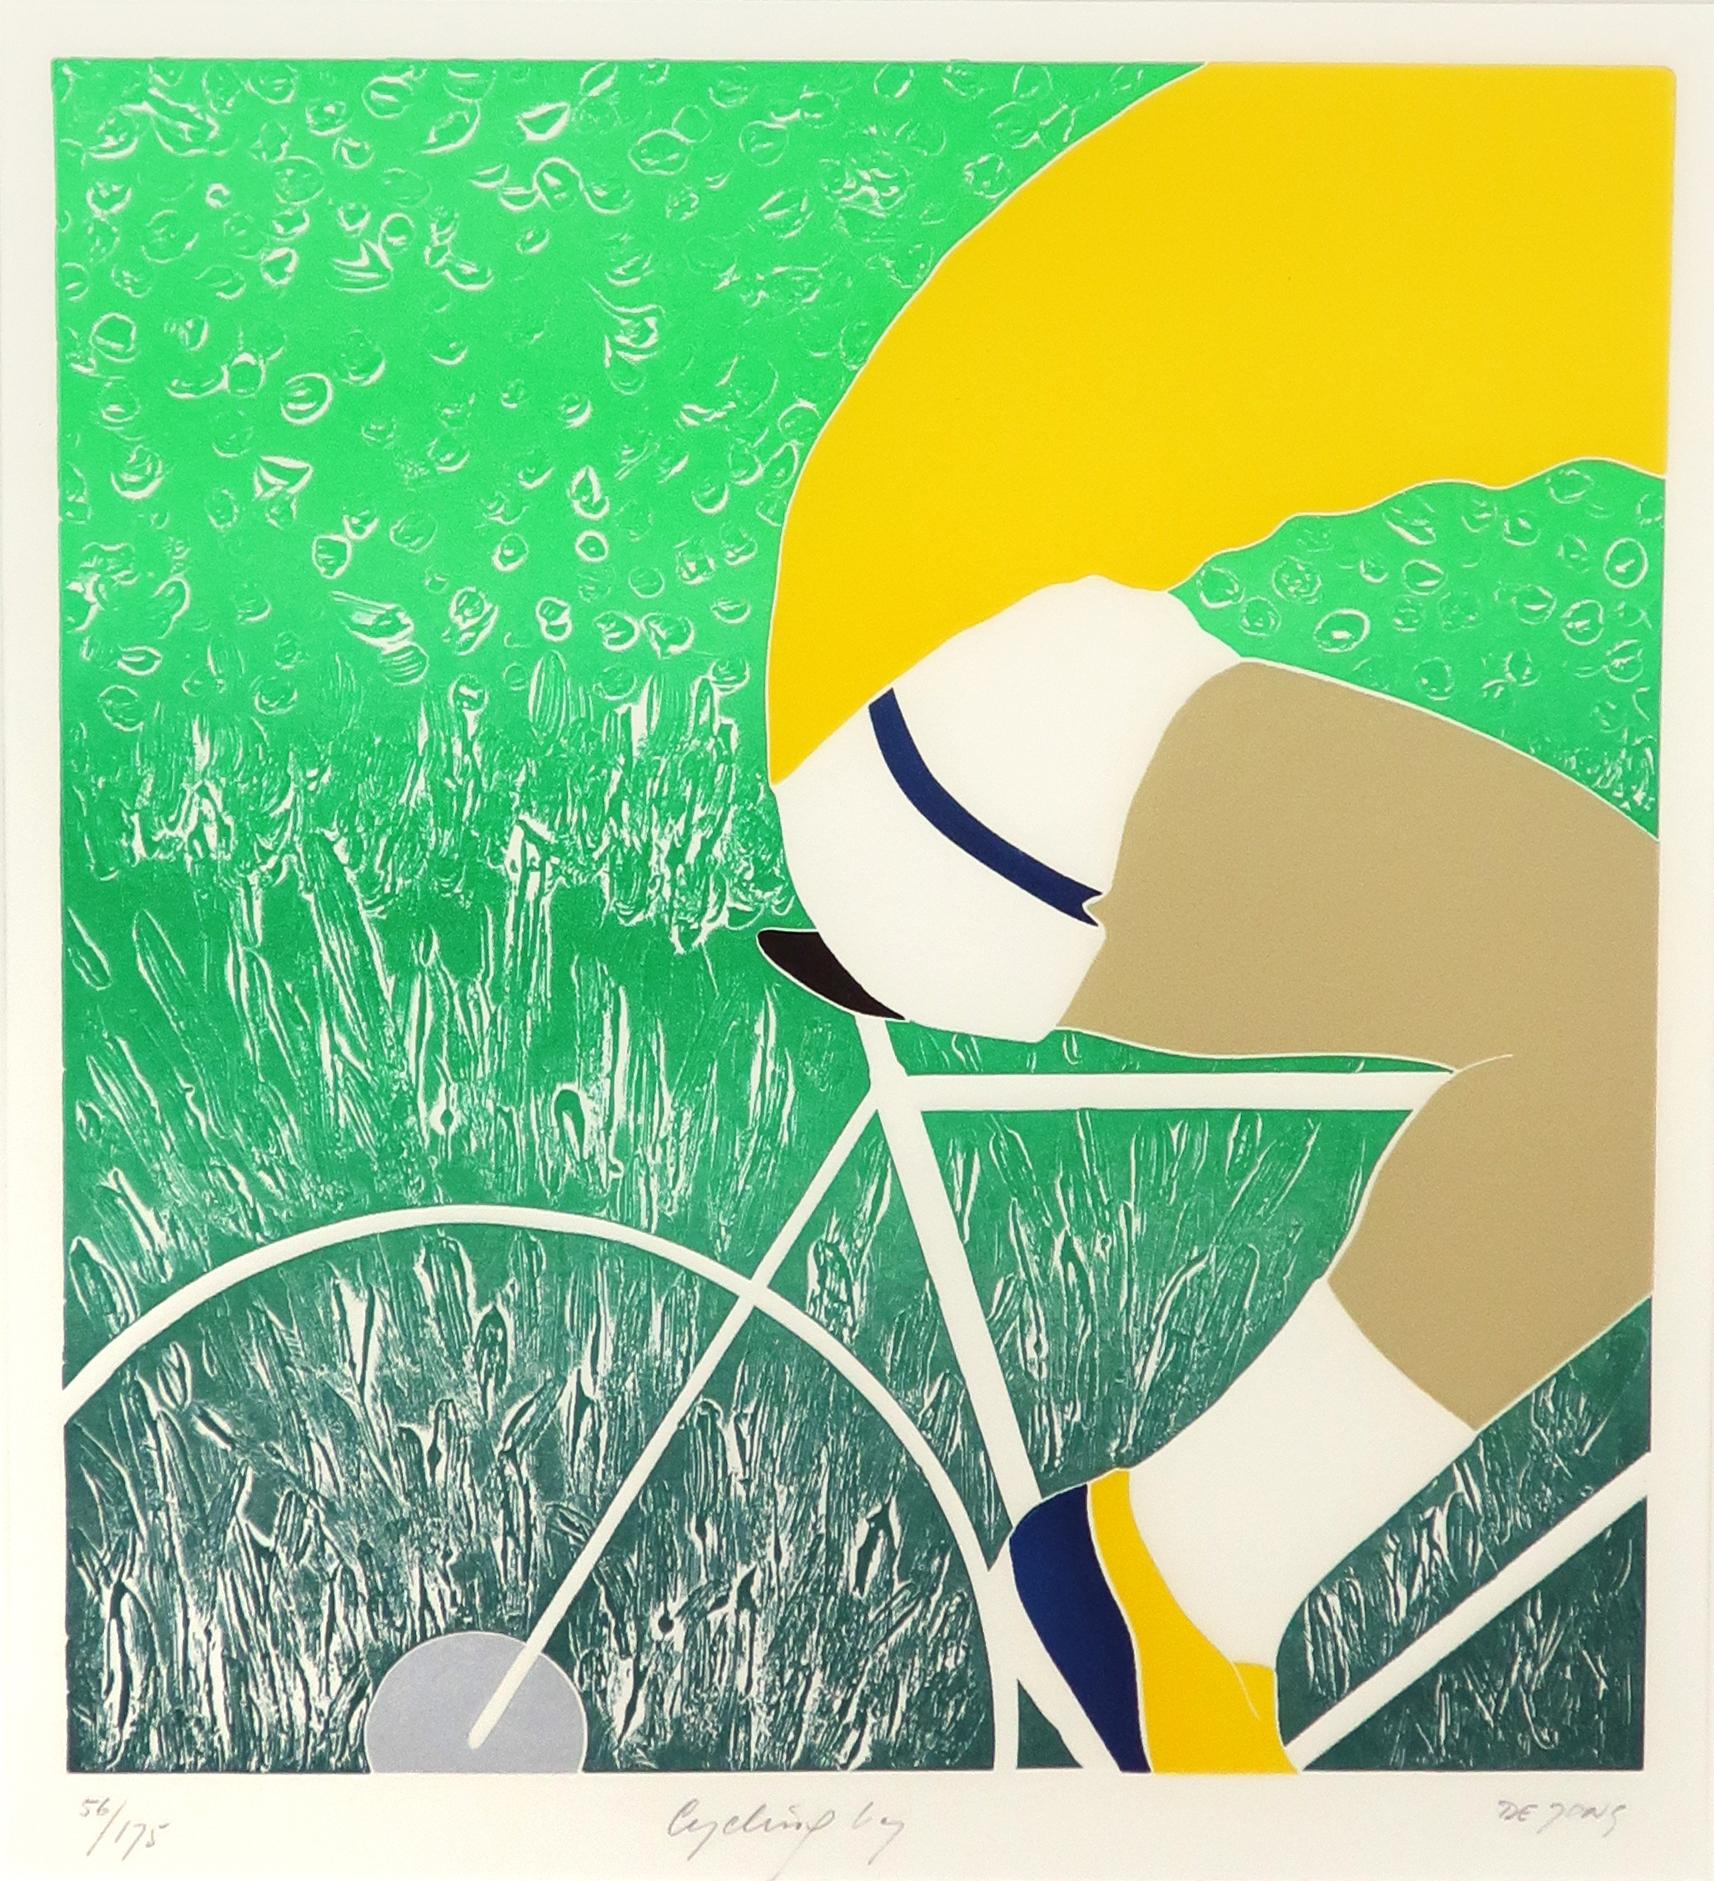 A late mid-century modern serigraph by Dutch NYC-based artist, Thom De Jong. Green, yelow, and blue, and signed and numberd by the artist in pencil. Number 56 in an edition of 175. Sticker on reverse shows it was produced by 